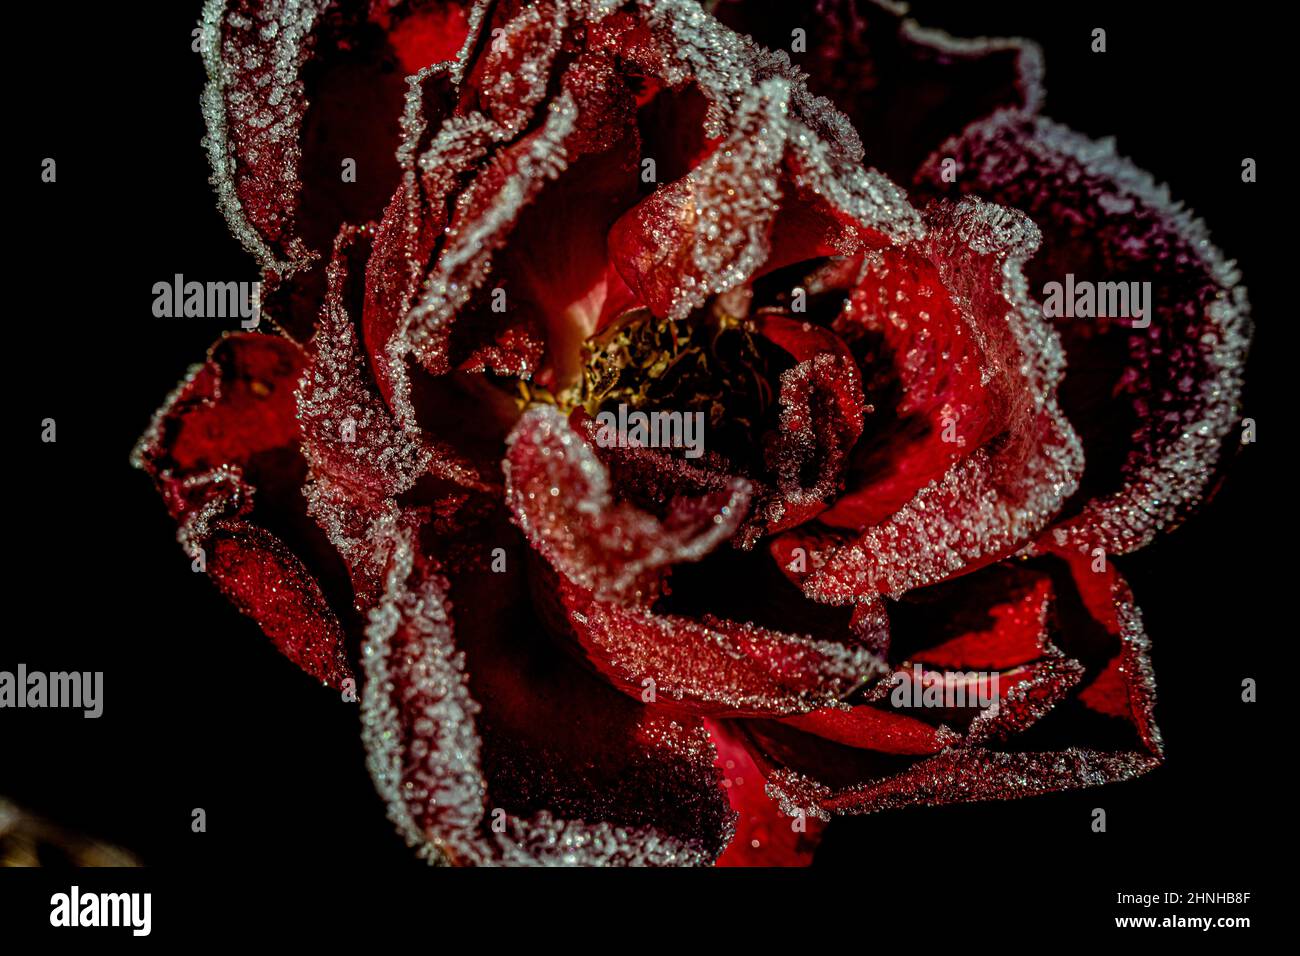 close up photo of a frozen red rose it could be used as a book cover or about some symbol to show love for women and against violence against women Stock Photo